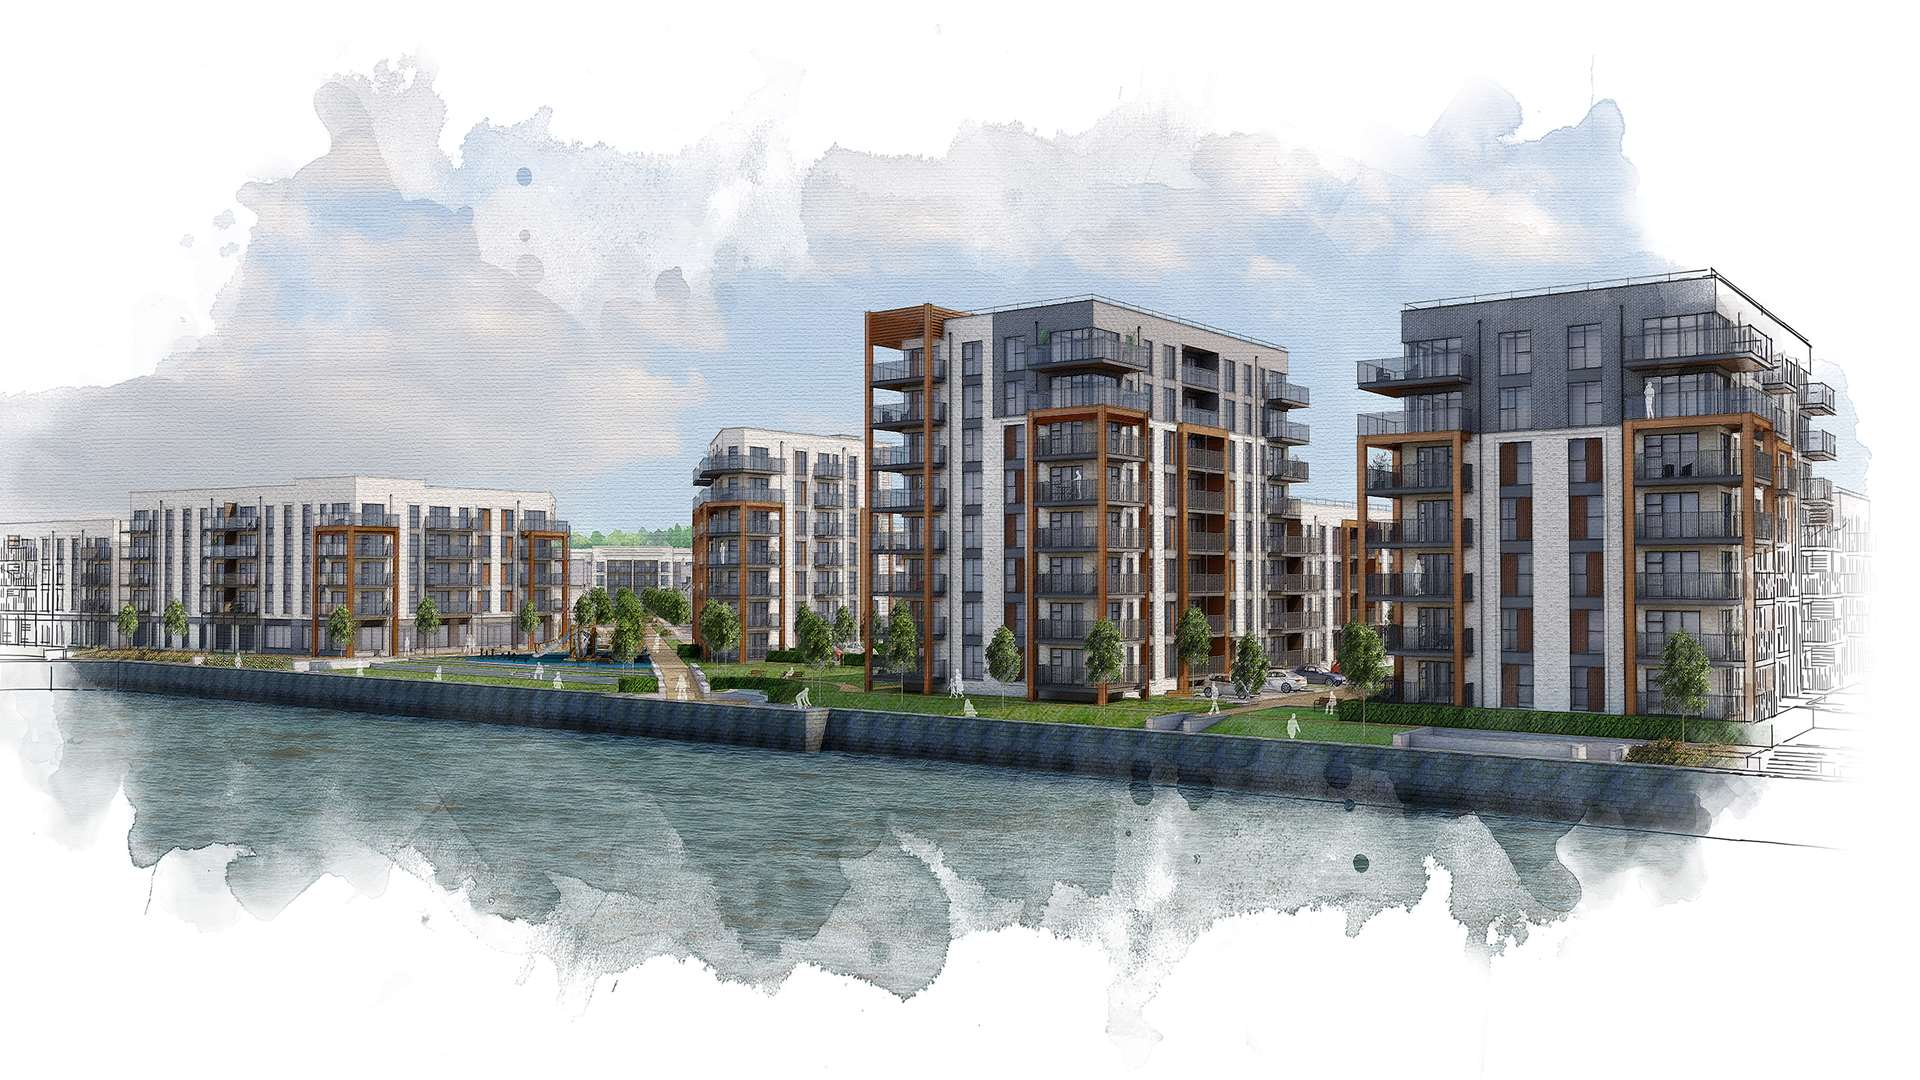 Almost 600 homes will be built on the banks of the River Thames at Northfleet